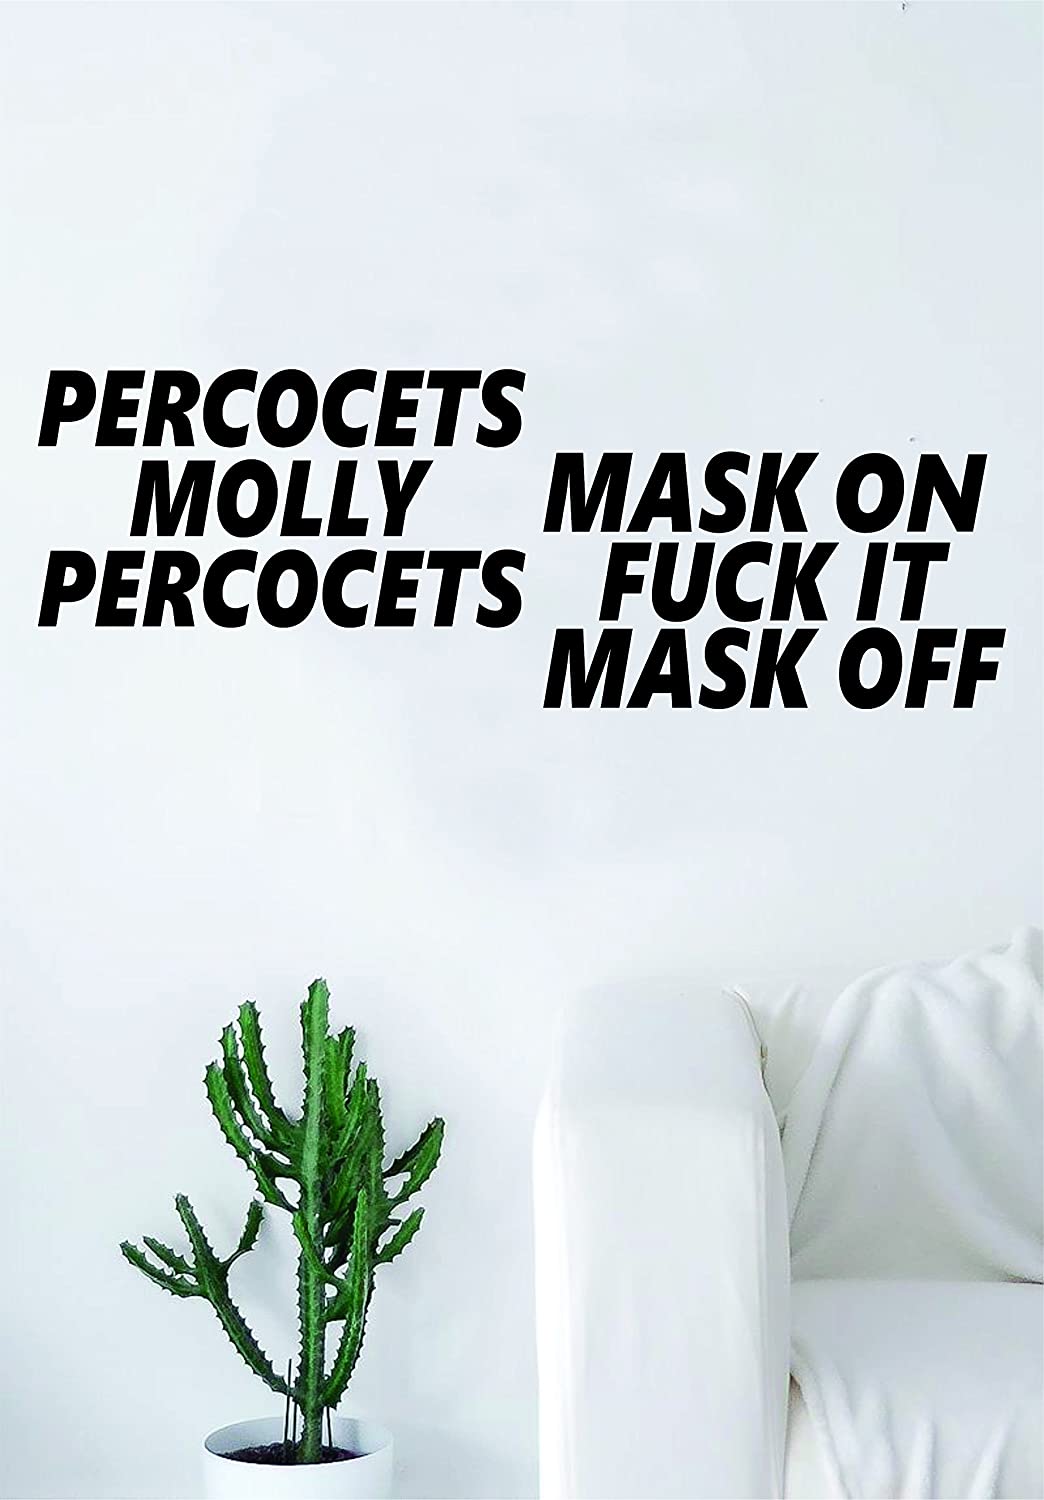 High Quality Future mask on mask off percocets molly percocets Blank Meme Template